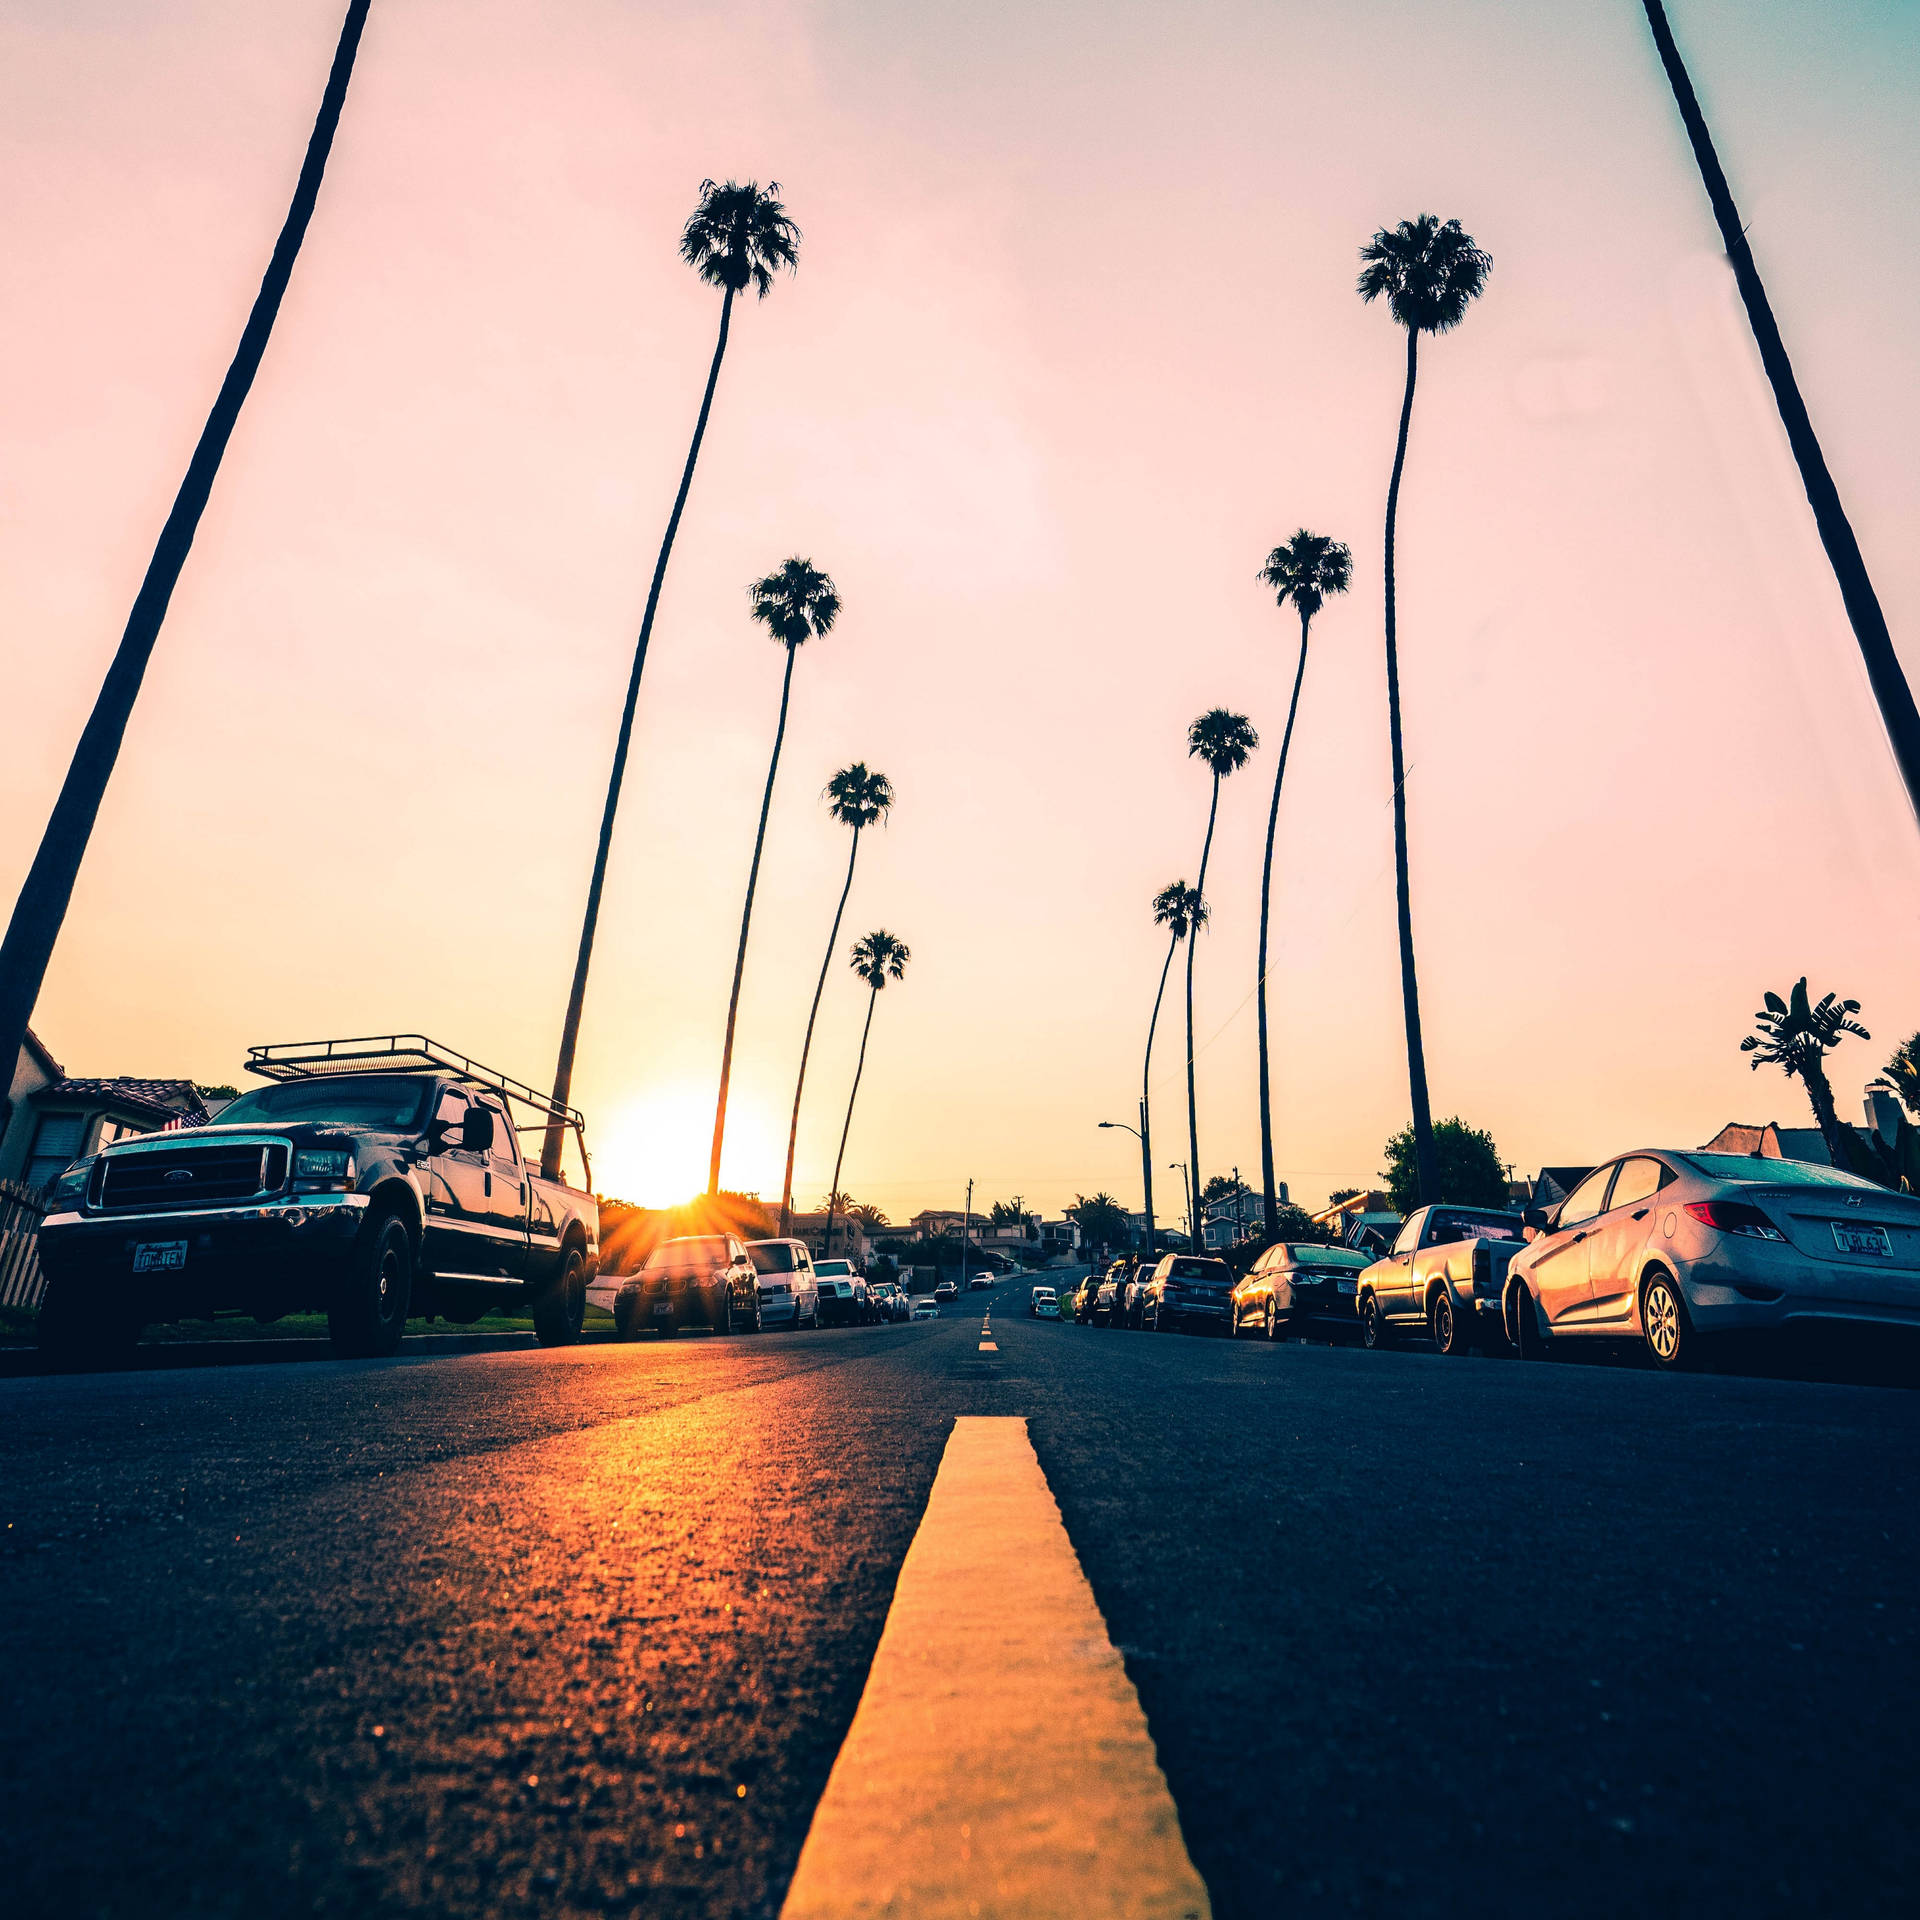 California Road With Palm Trees Background